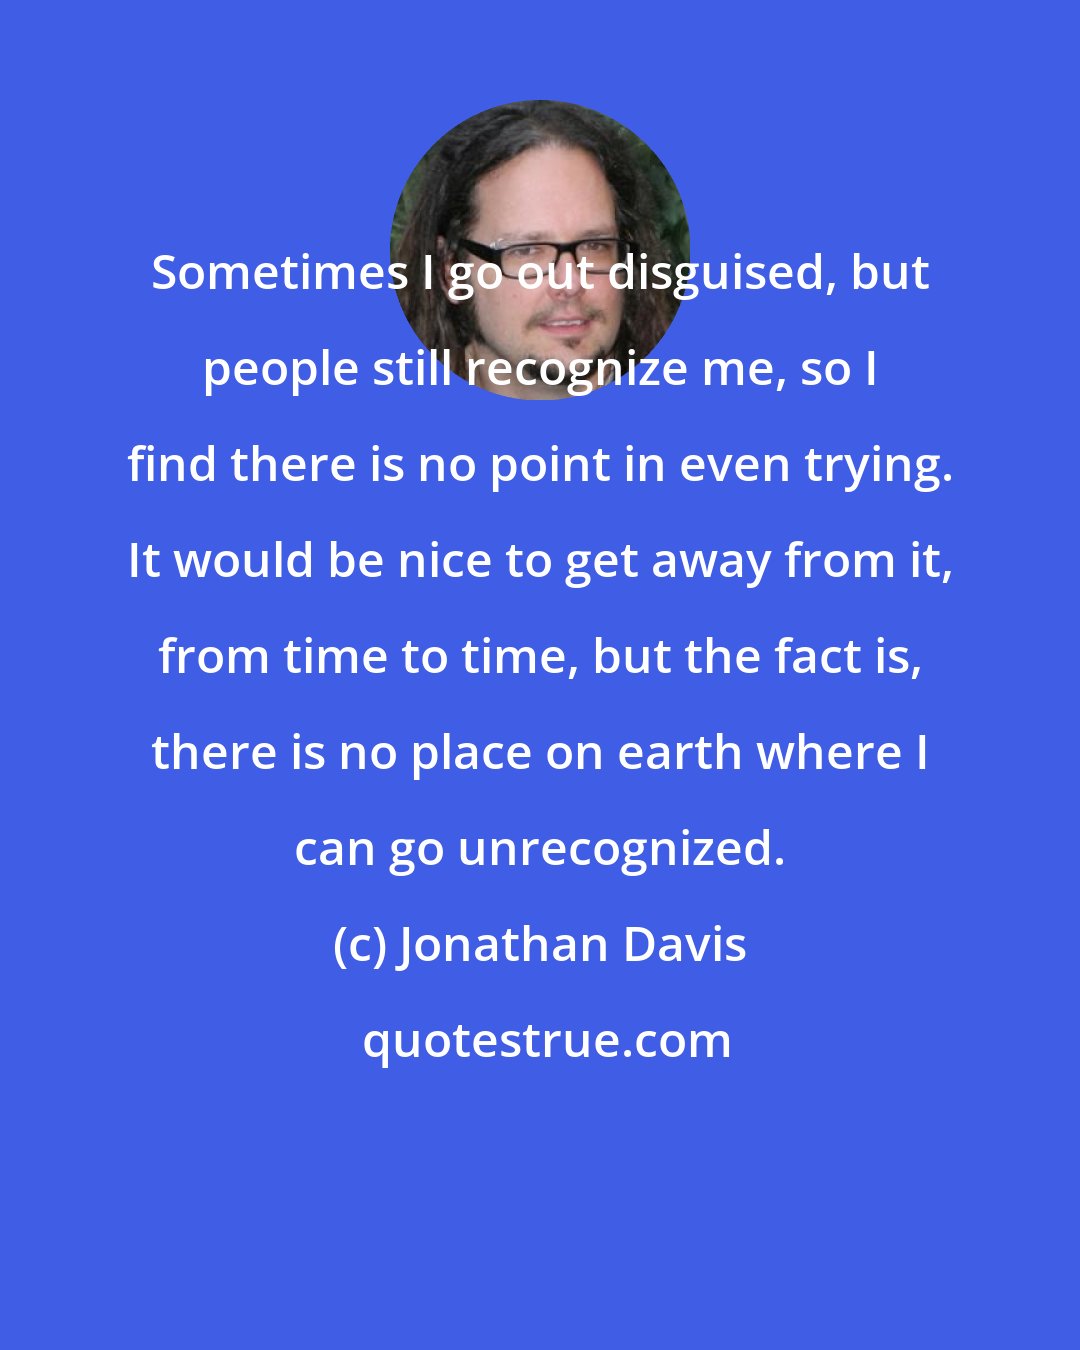 Jonathan Davis: Sometimes I go out disguised, but people still recognize me, so I find there is no point in even trying. It would be nice to get away from it, from time to time, but the fact is, there is no place on earth where I can go unrecognized.